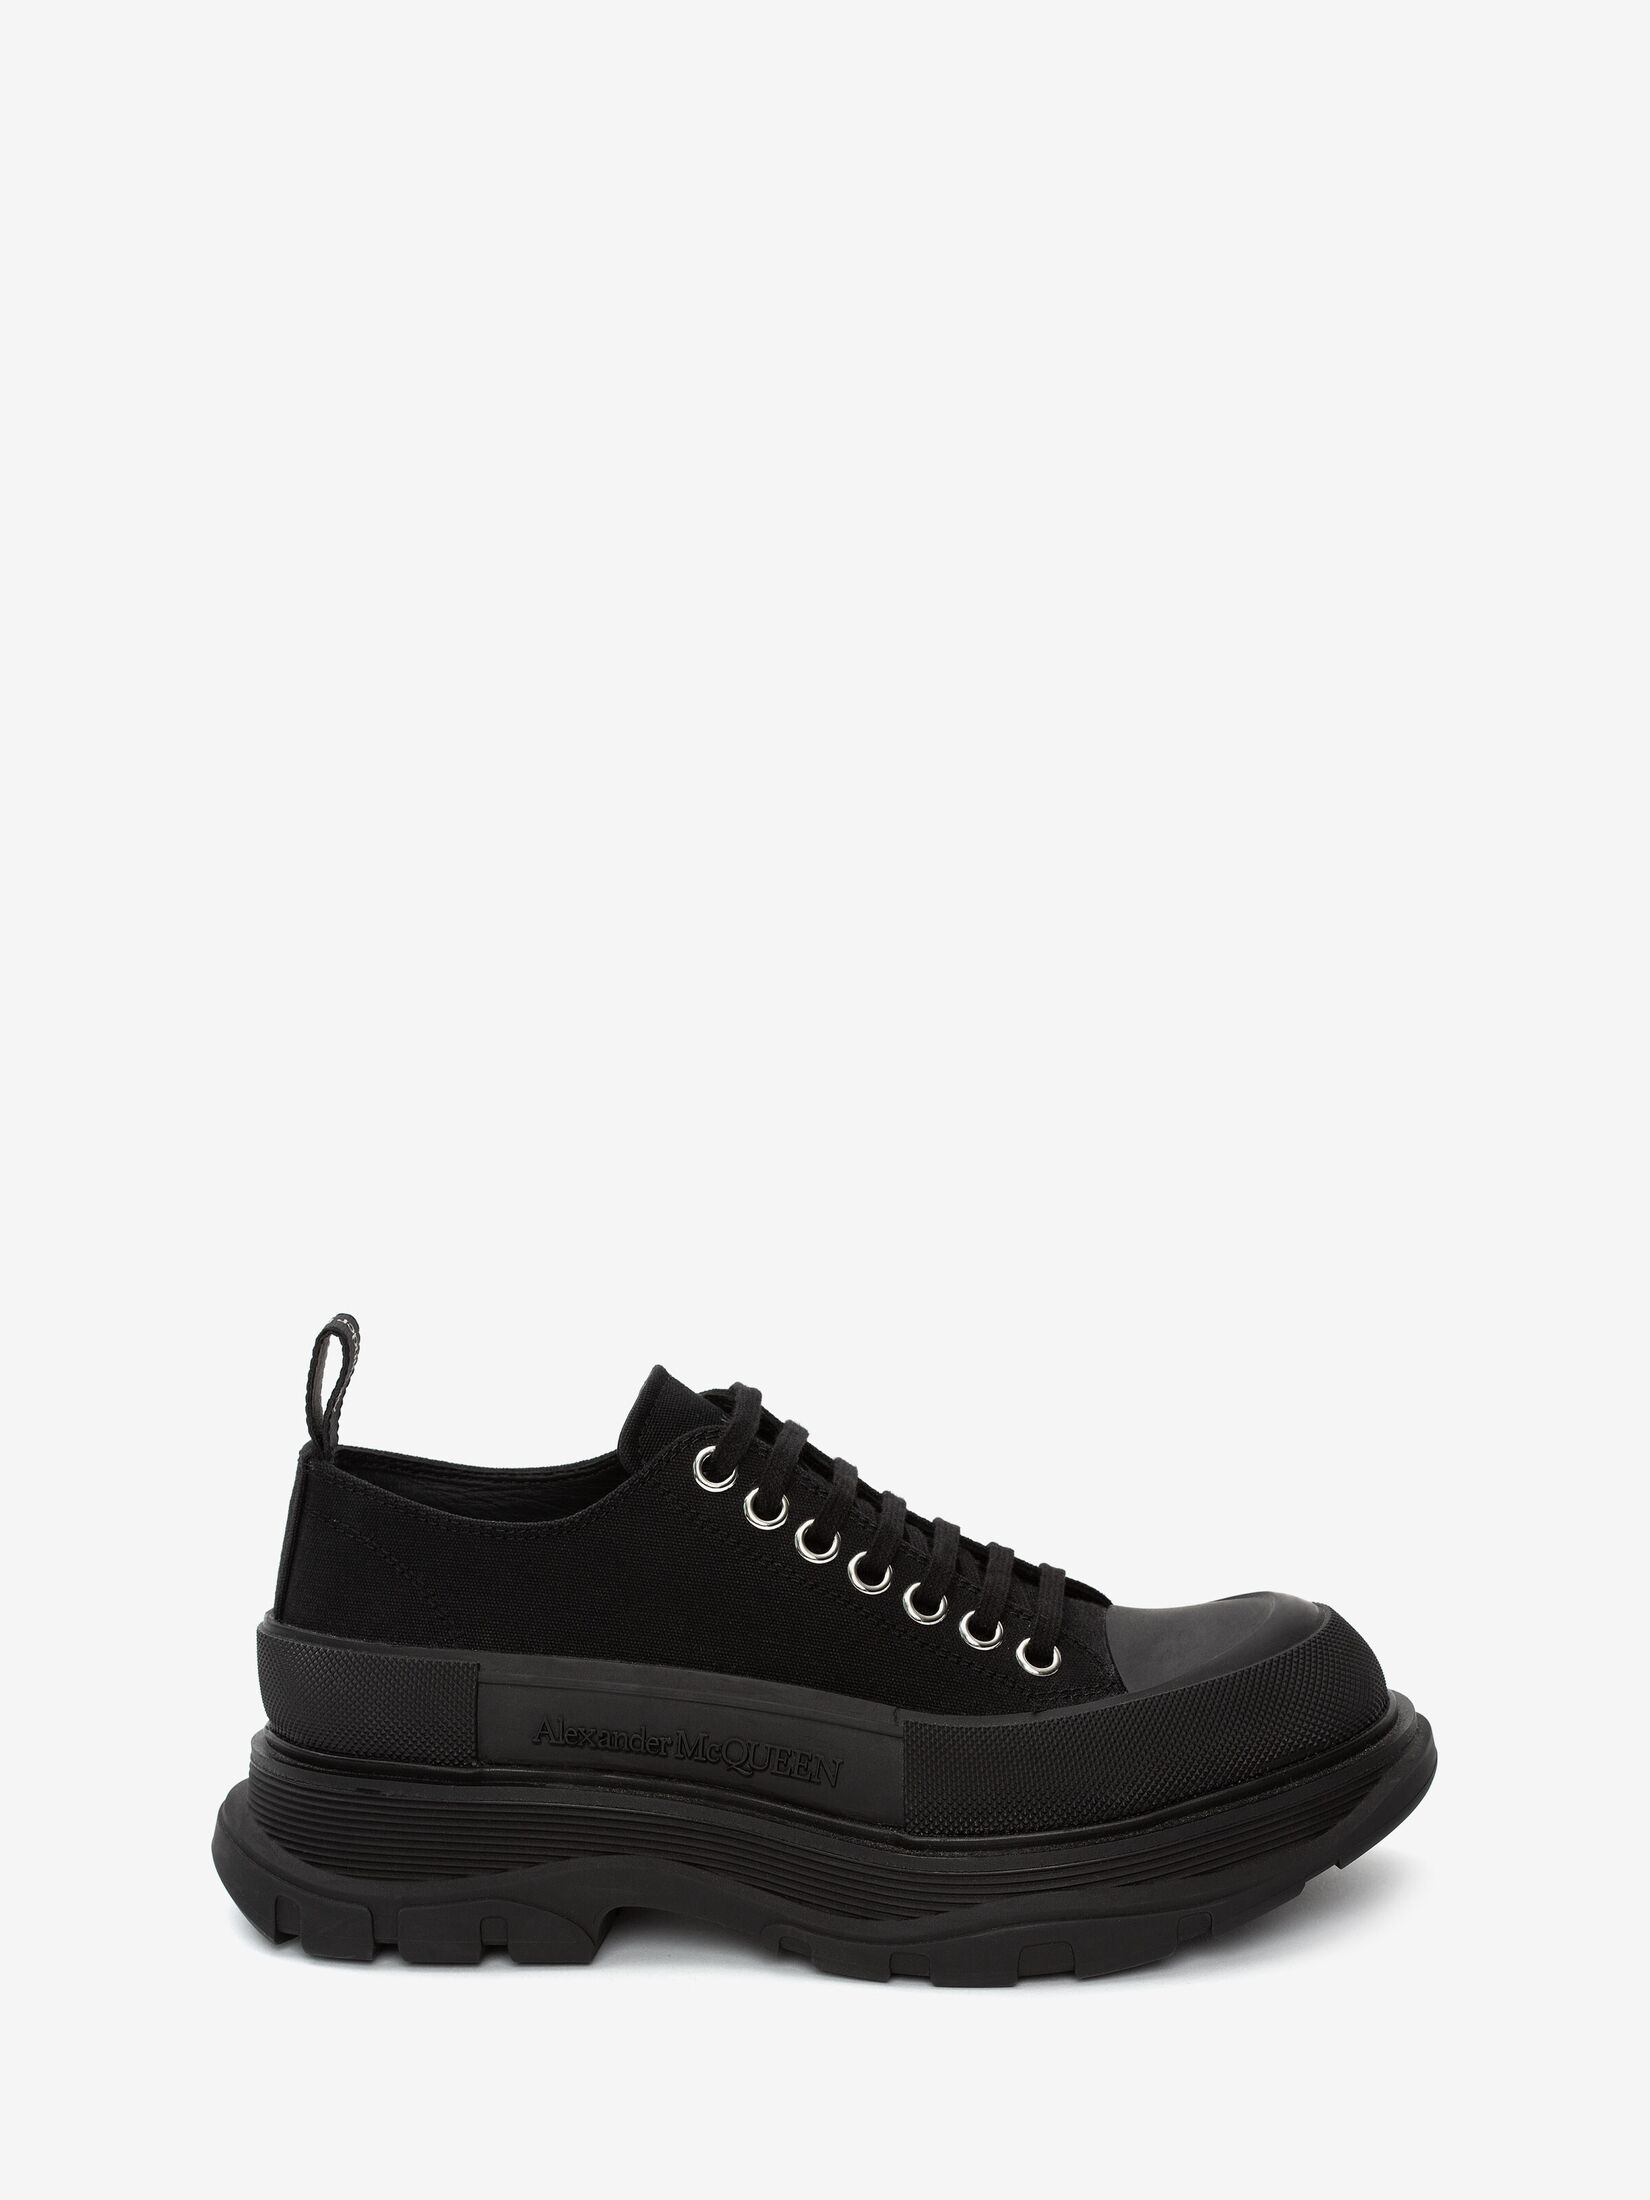 Tread Slick Lace Up in Black/White | Alexander McQueen US